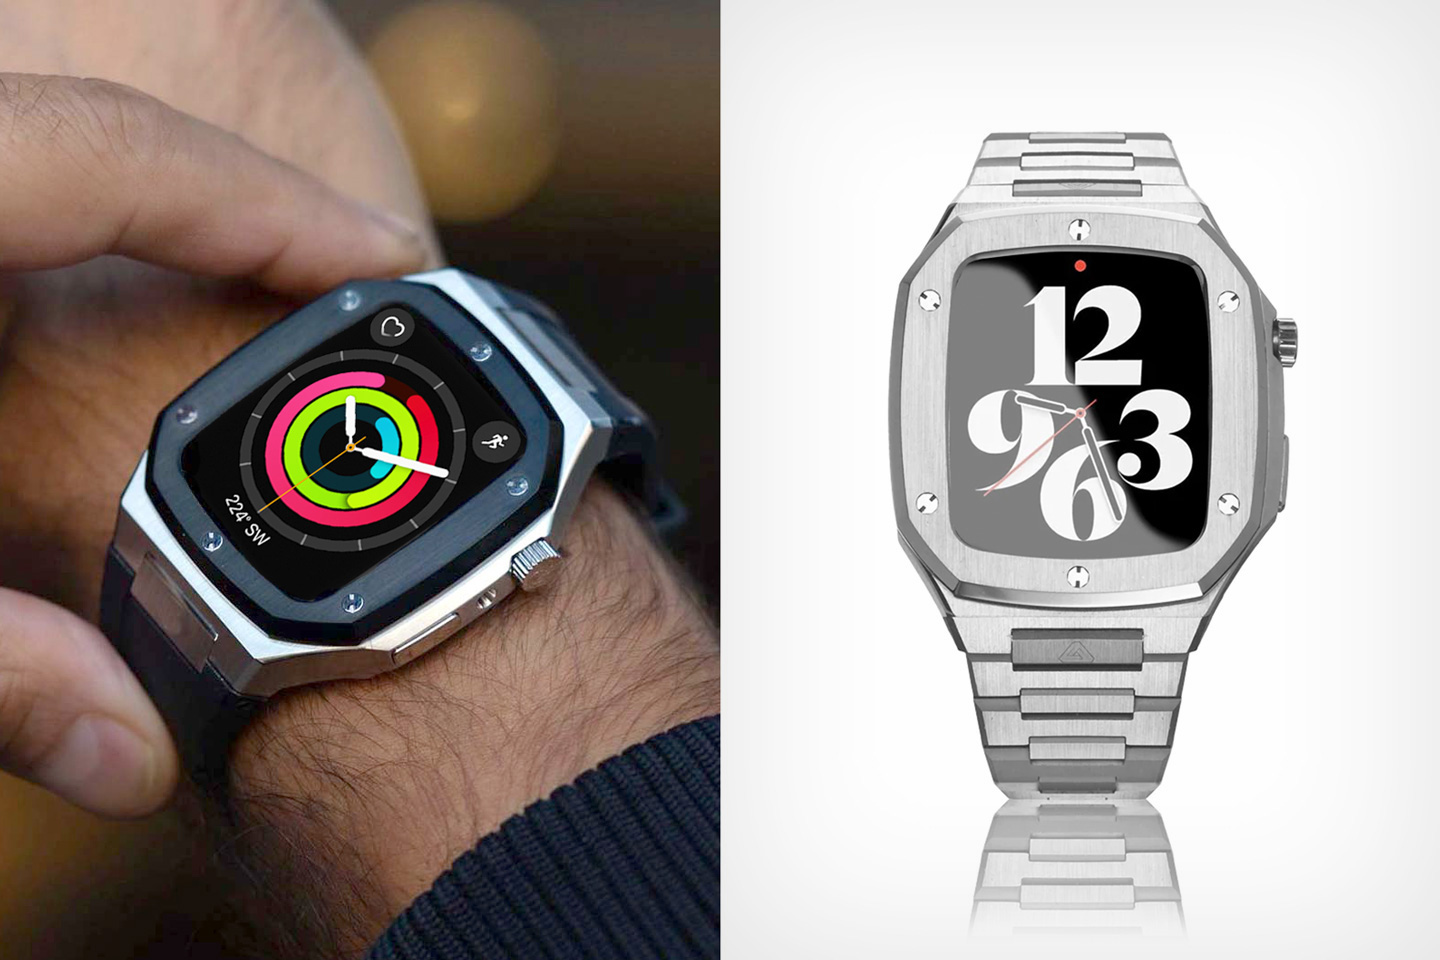 The Ultimate Collection of Luxury Apple Watch Faces